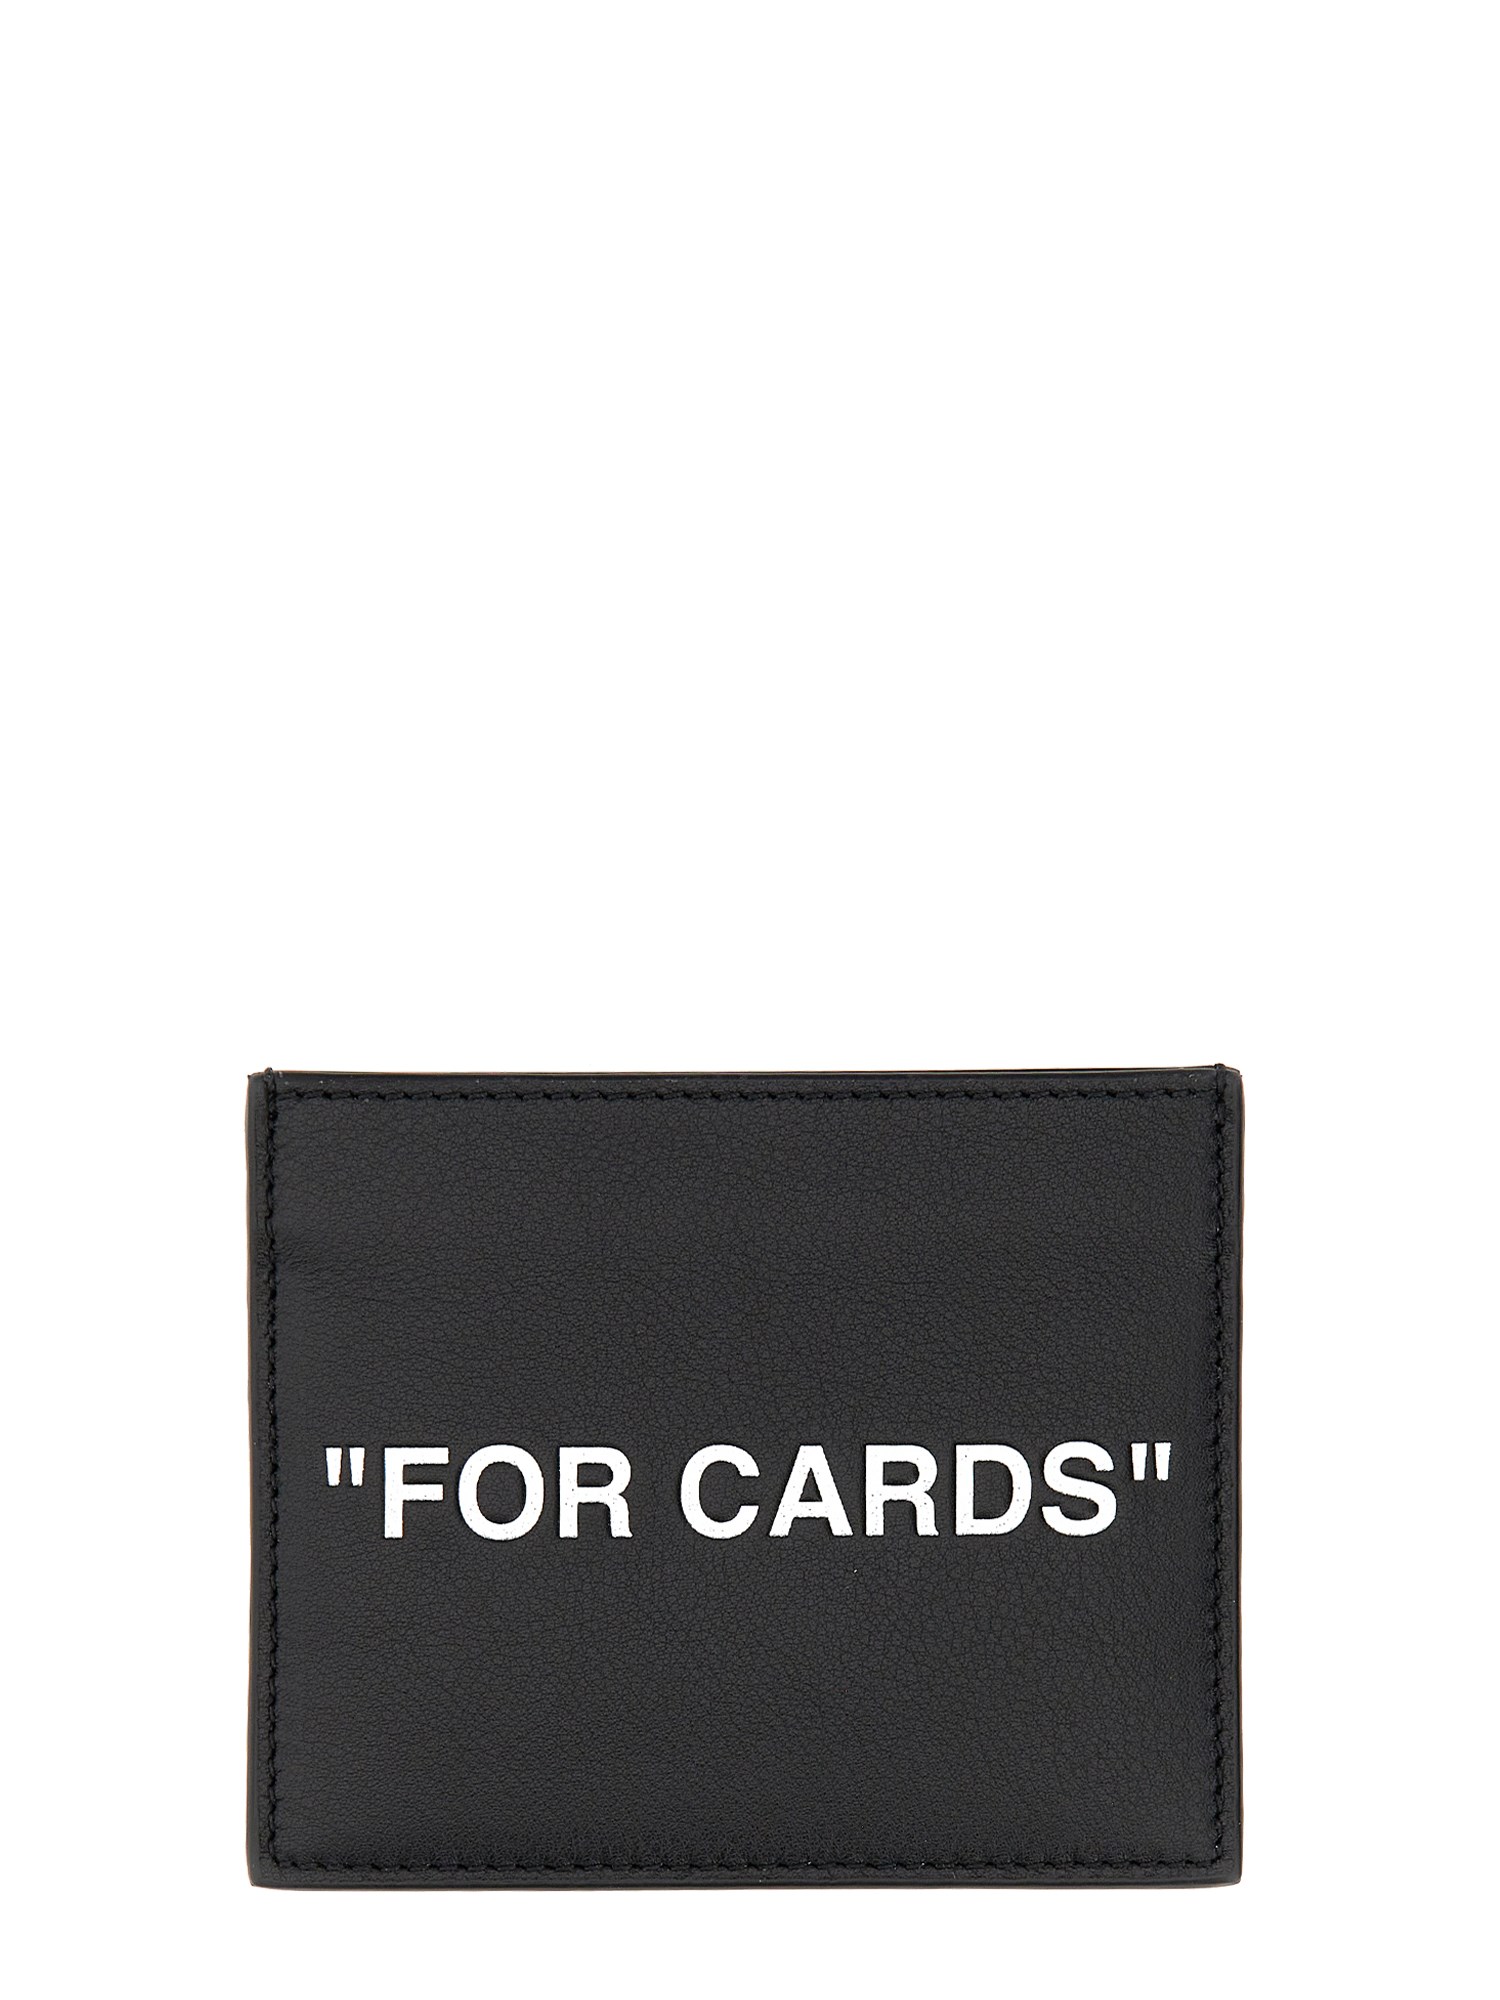 off-white card holder for cards